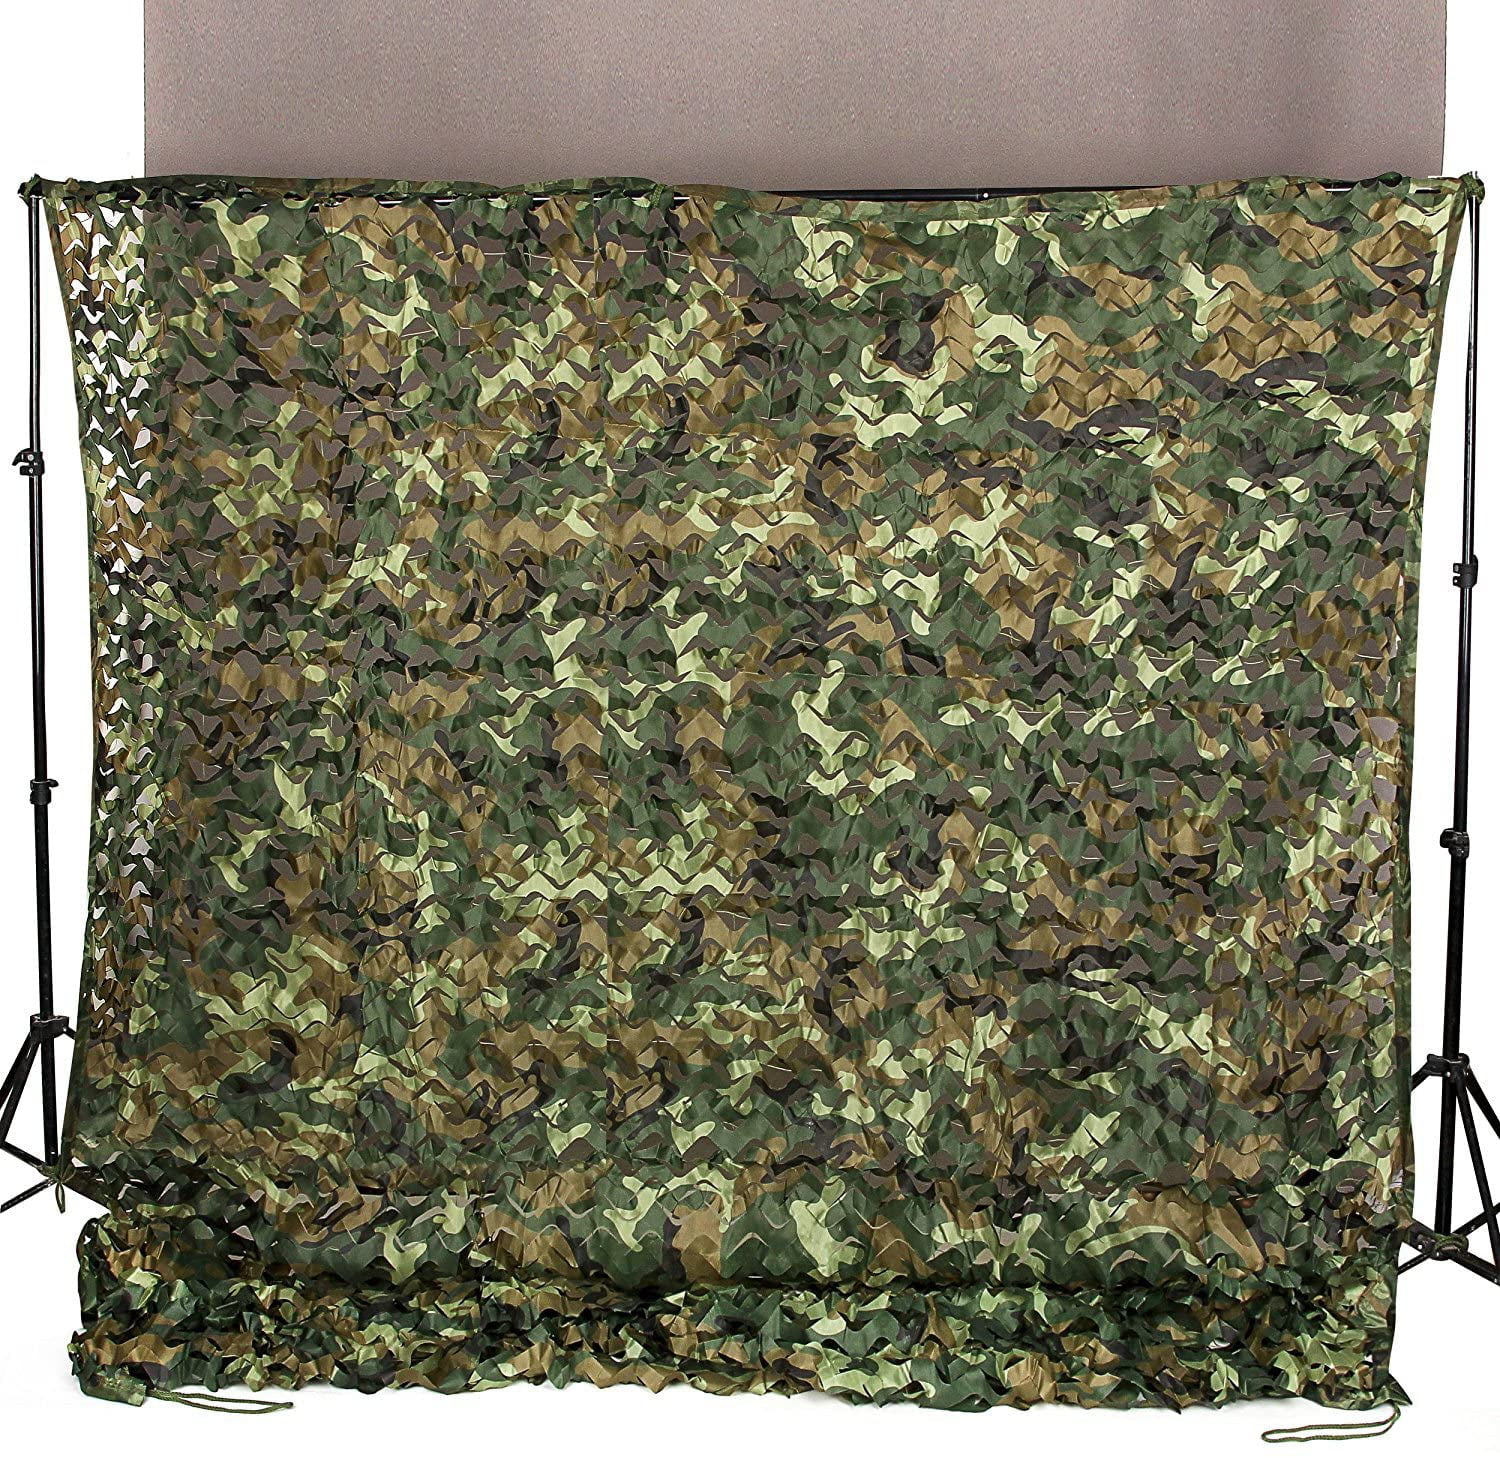 New Camouflage Camo Net Netting Hide Hunting Military Woodland Camp Decoration 